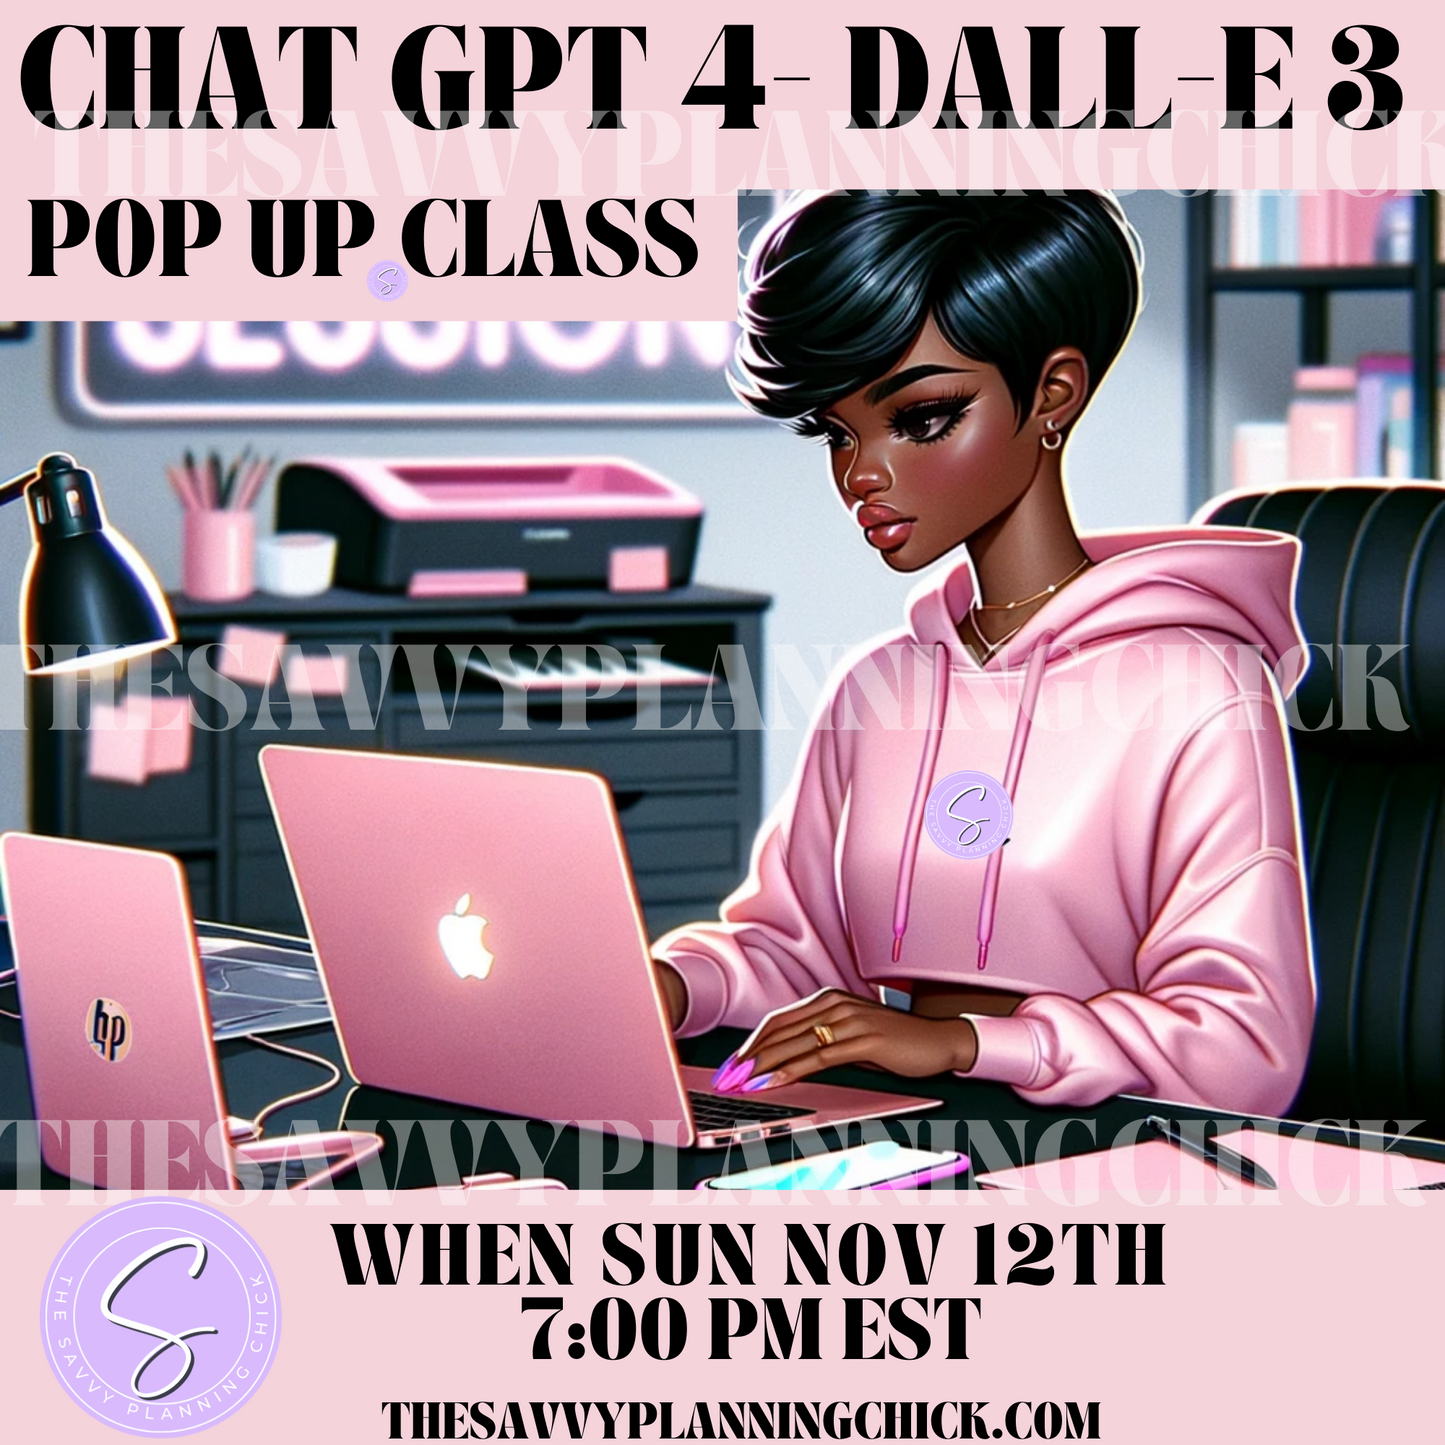 CHAT GPT 4 DALL-E 3 POP UP CLASS-REPLAY